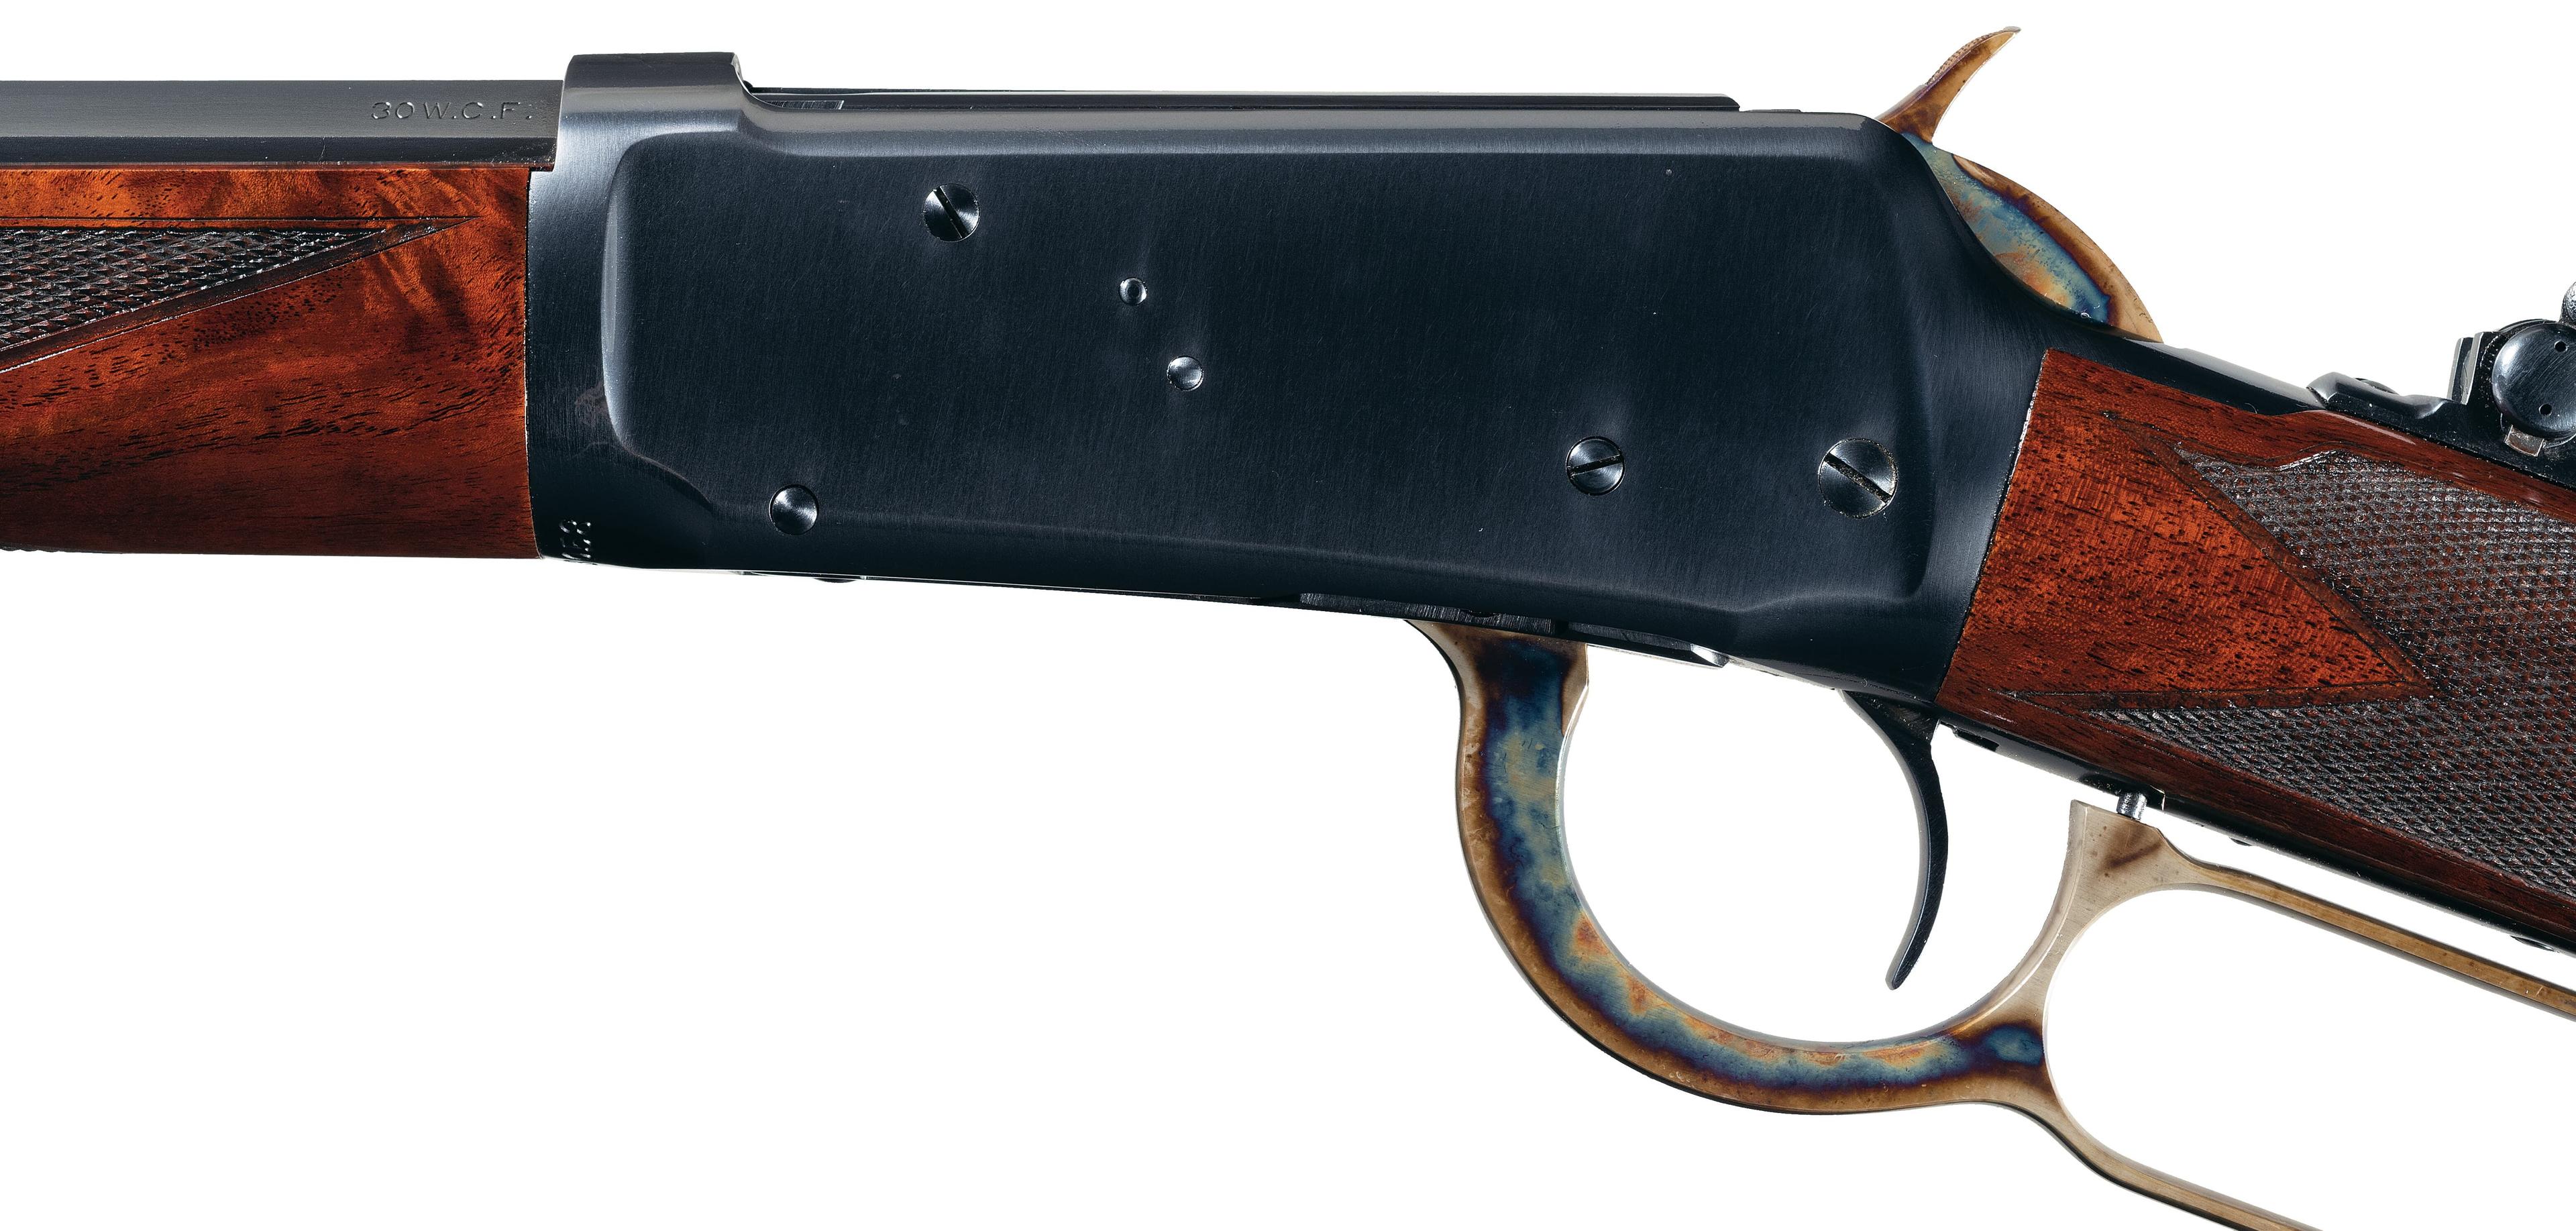 Turnbull Deluxe Upgraded Winchester Model 1894 Short Rifle